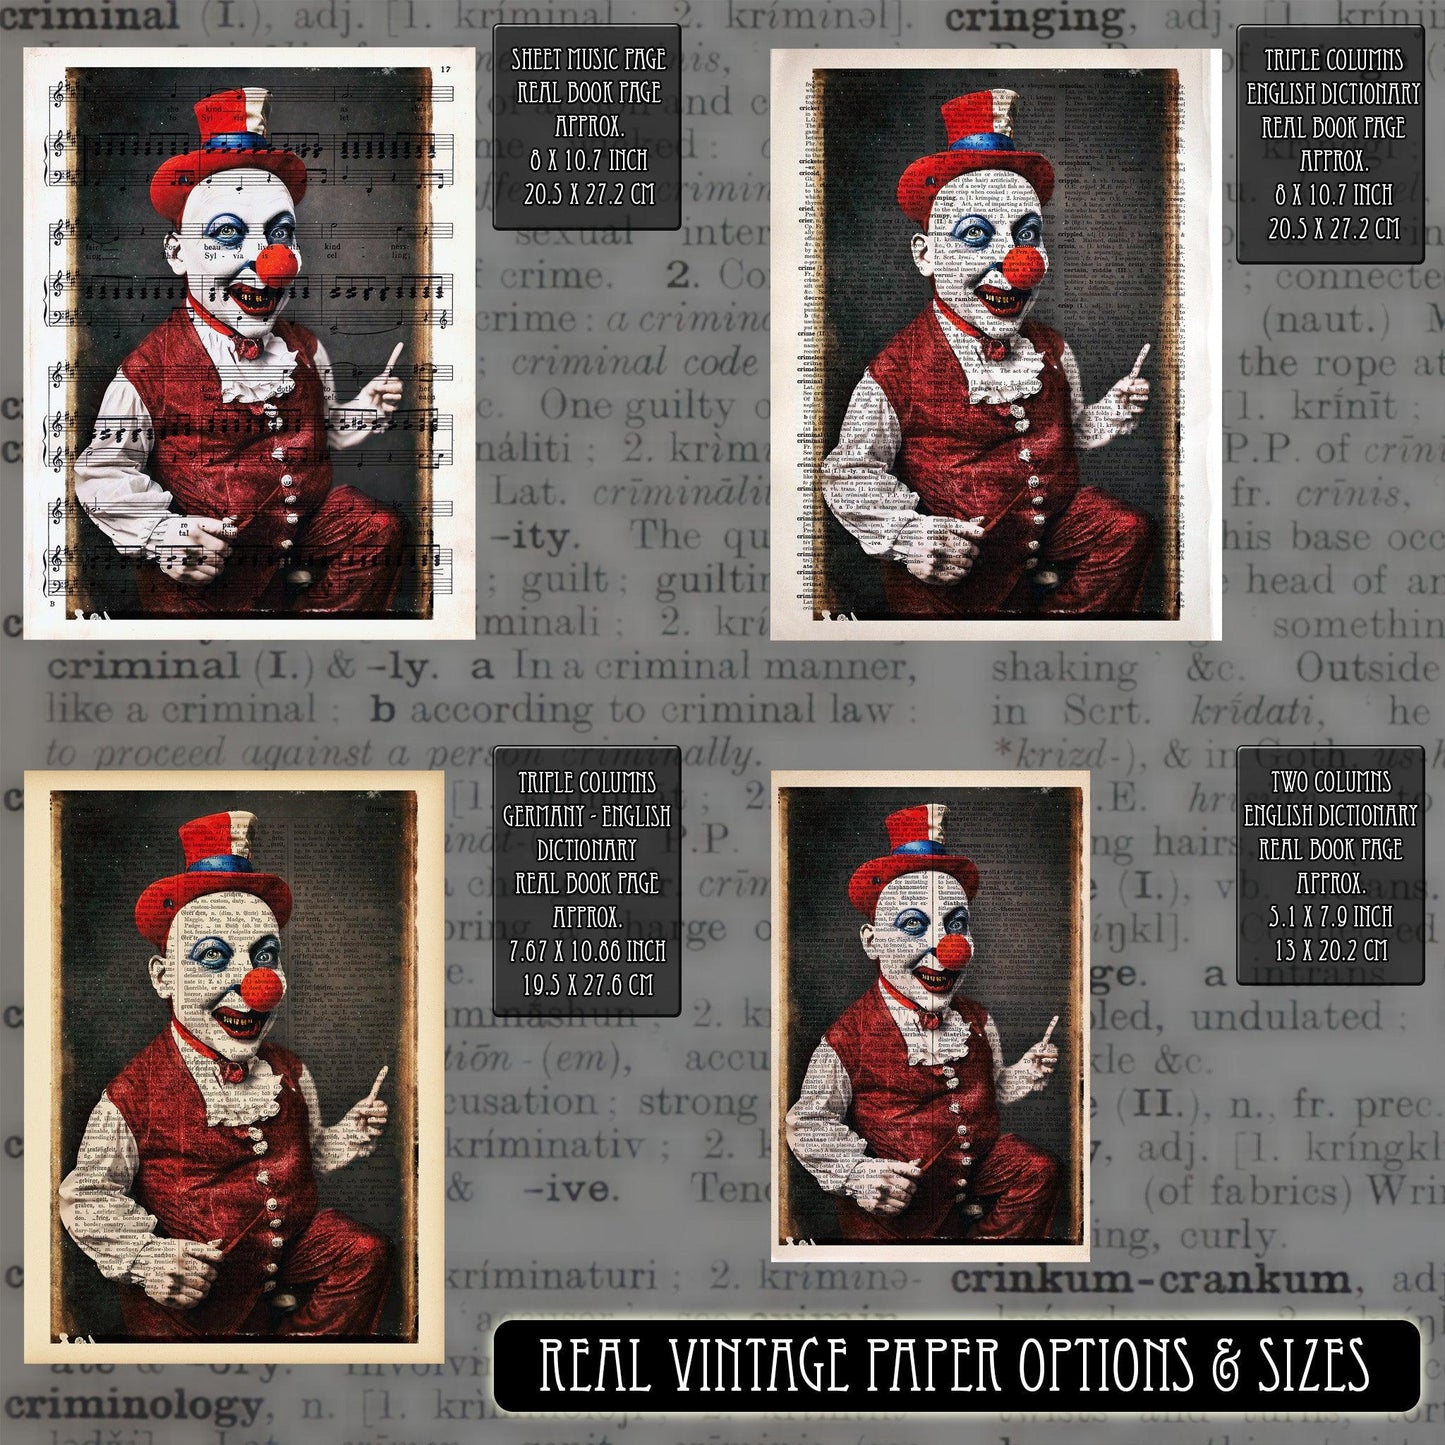 Unsettling Clown - Victorian Gothic Art on Vintage Dictionary Page - ArtCursor